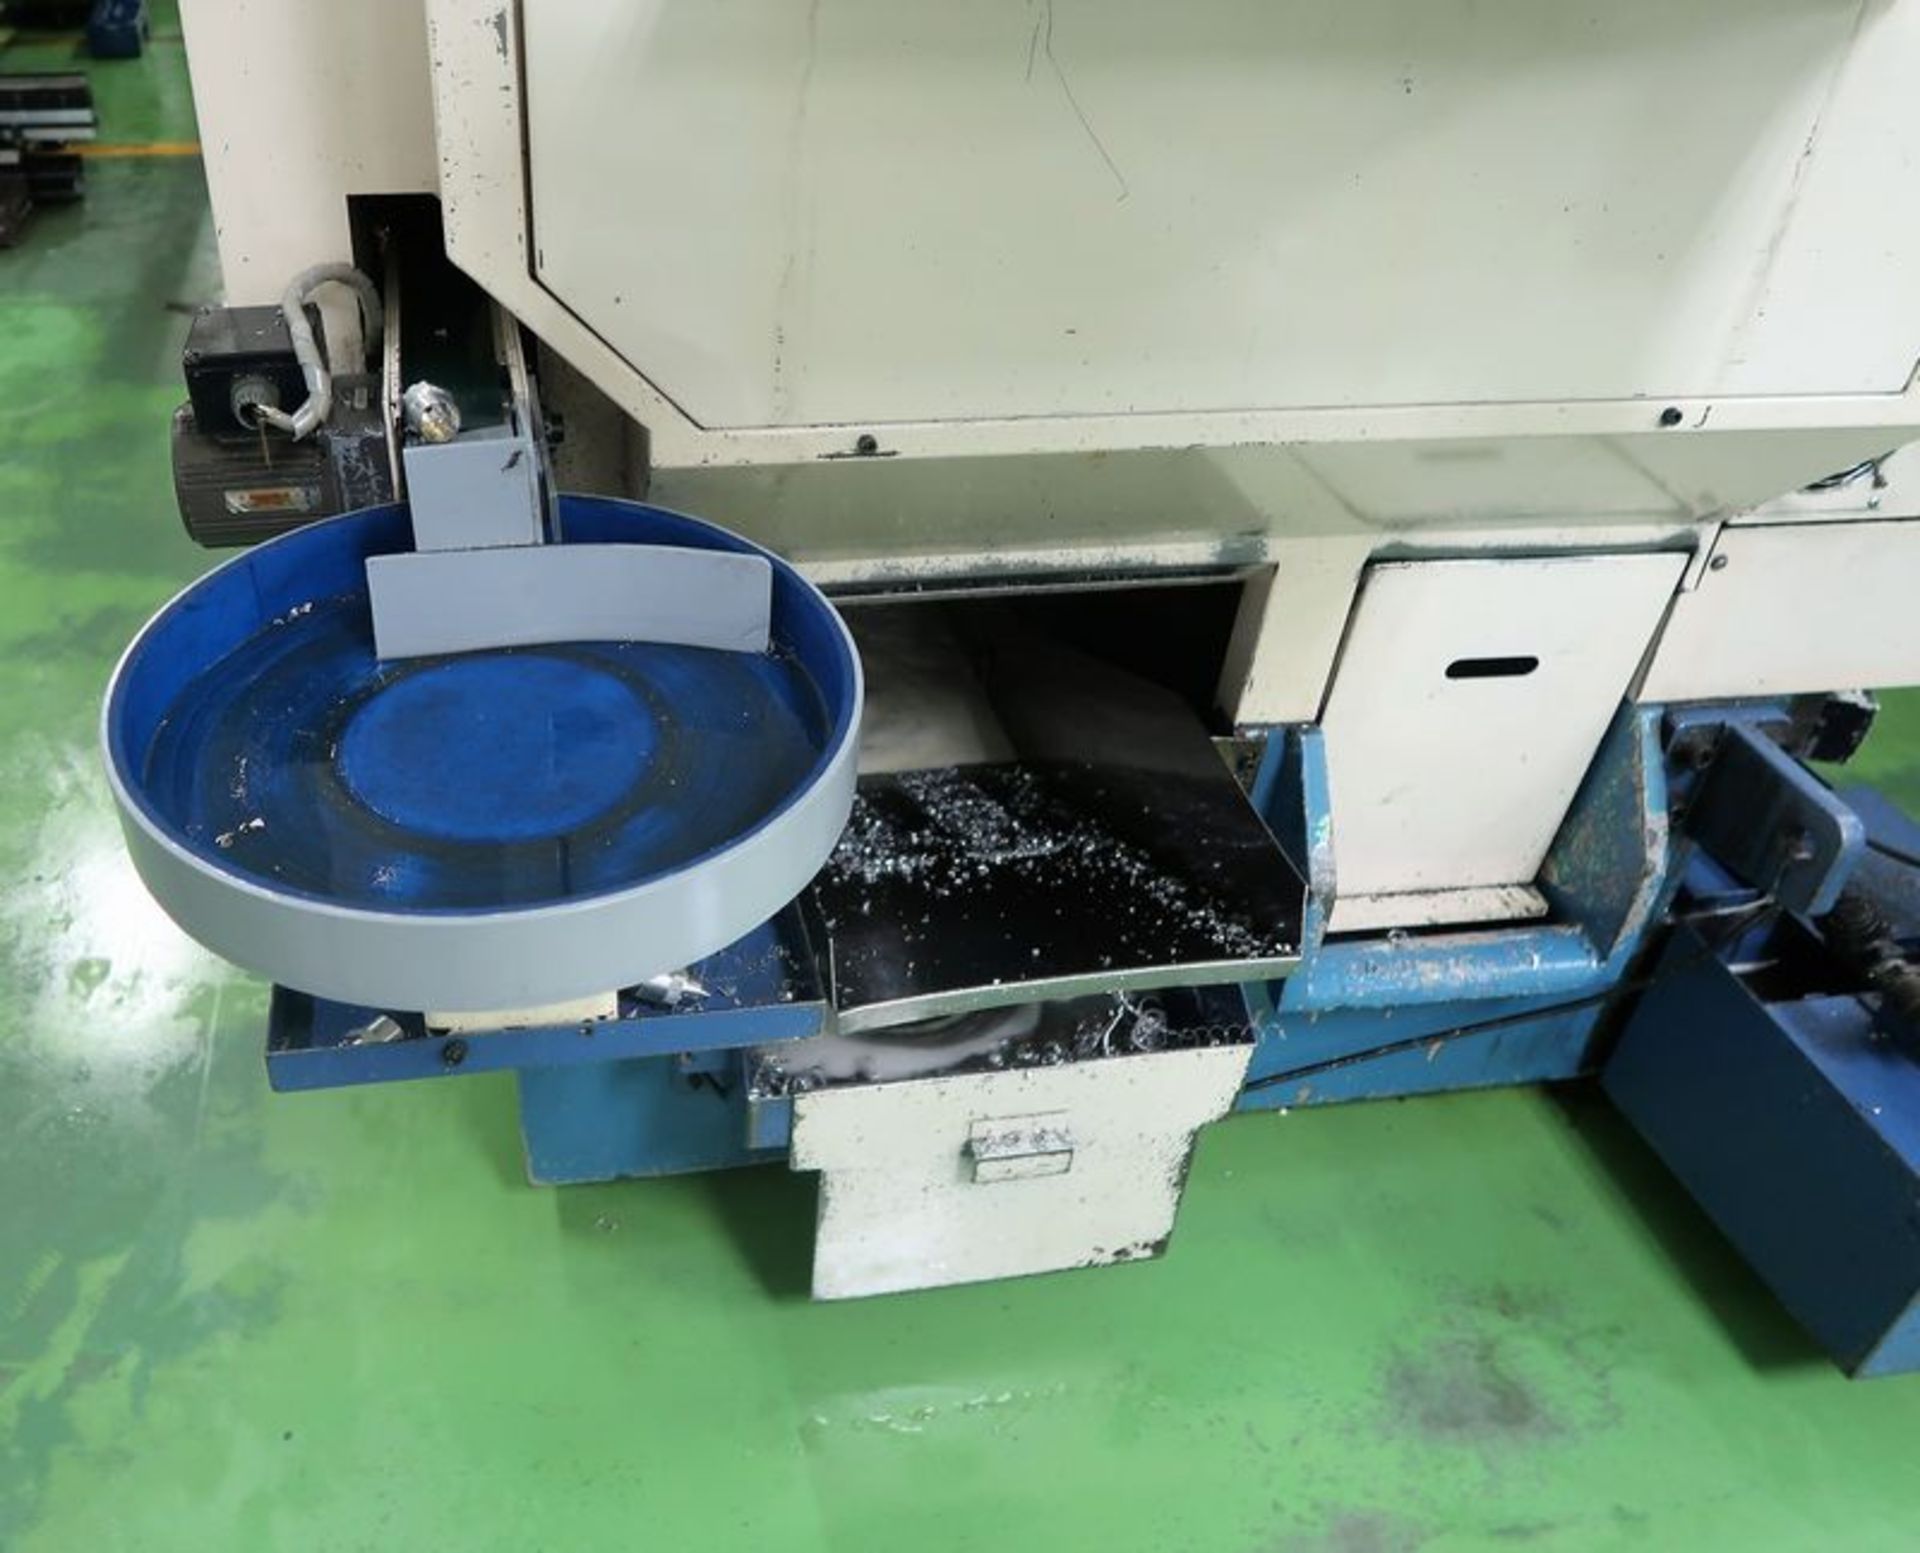 Miyano BNJ-42S 2 Spindle, 2 Turrets, Live Tools, C-Axis, S/N BN85608S new 2007 - Image 2 of 13